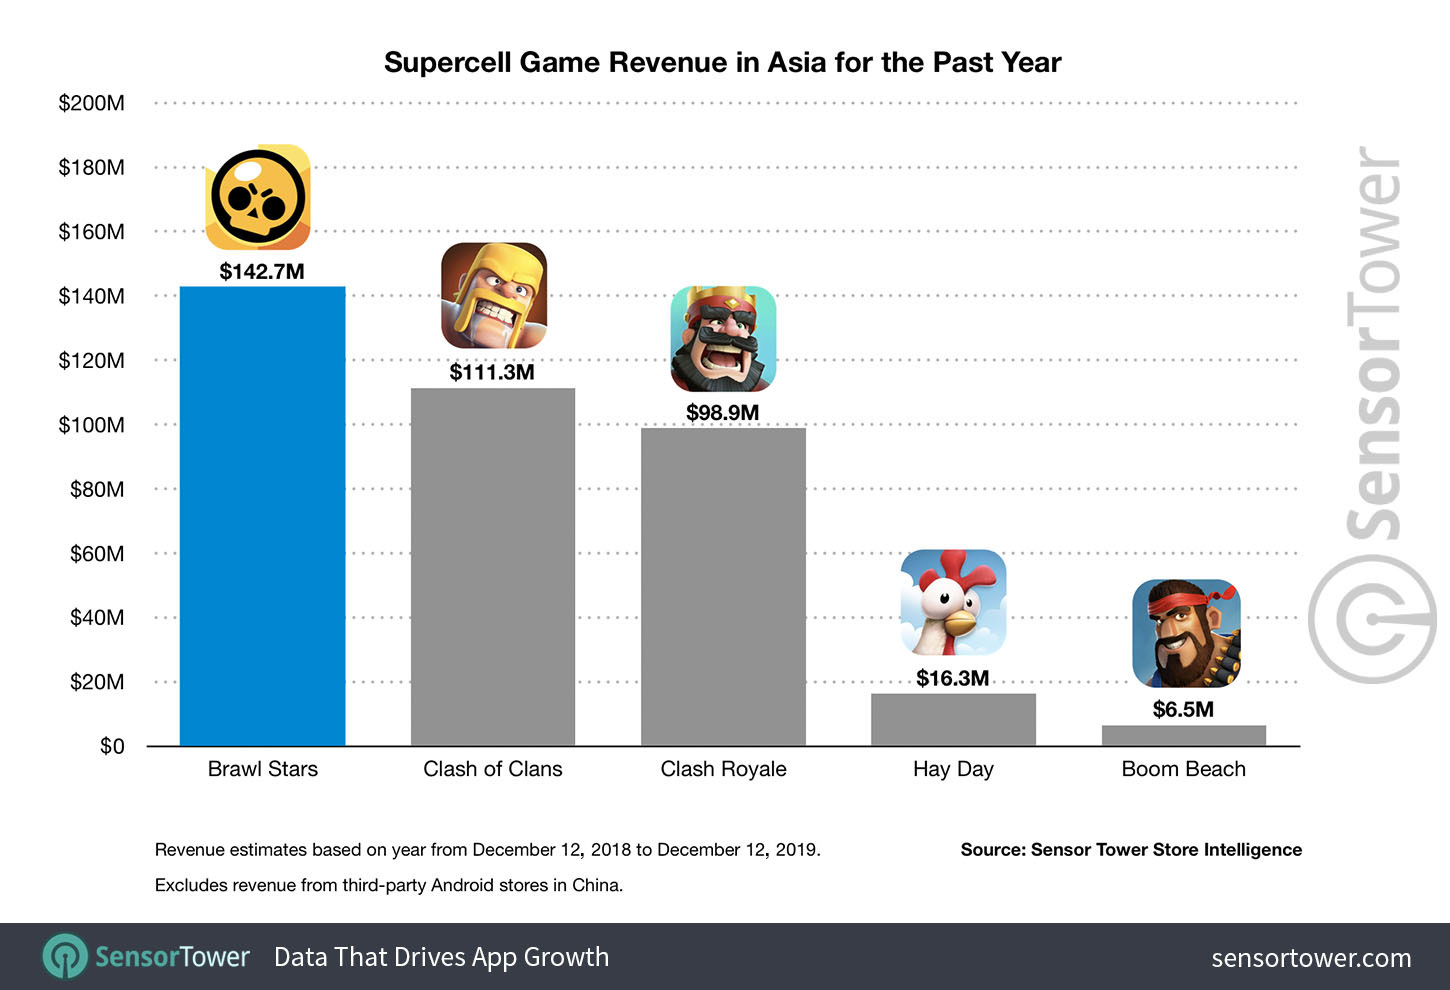 Revenue generated by Supercell games in Asia from December 12, 2018 to December 12, 2019